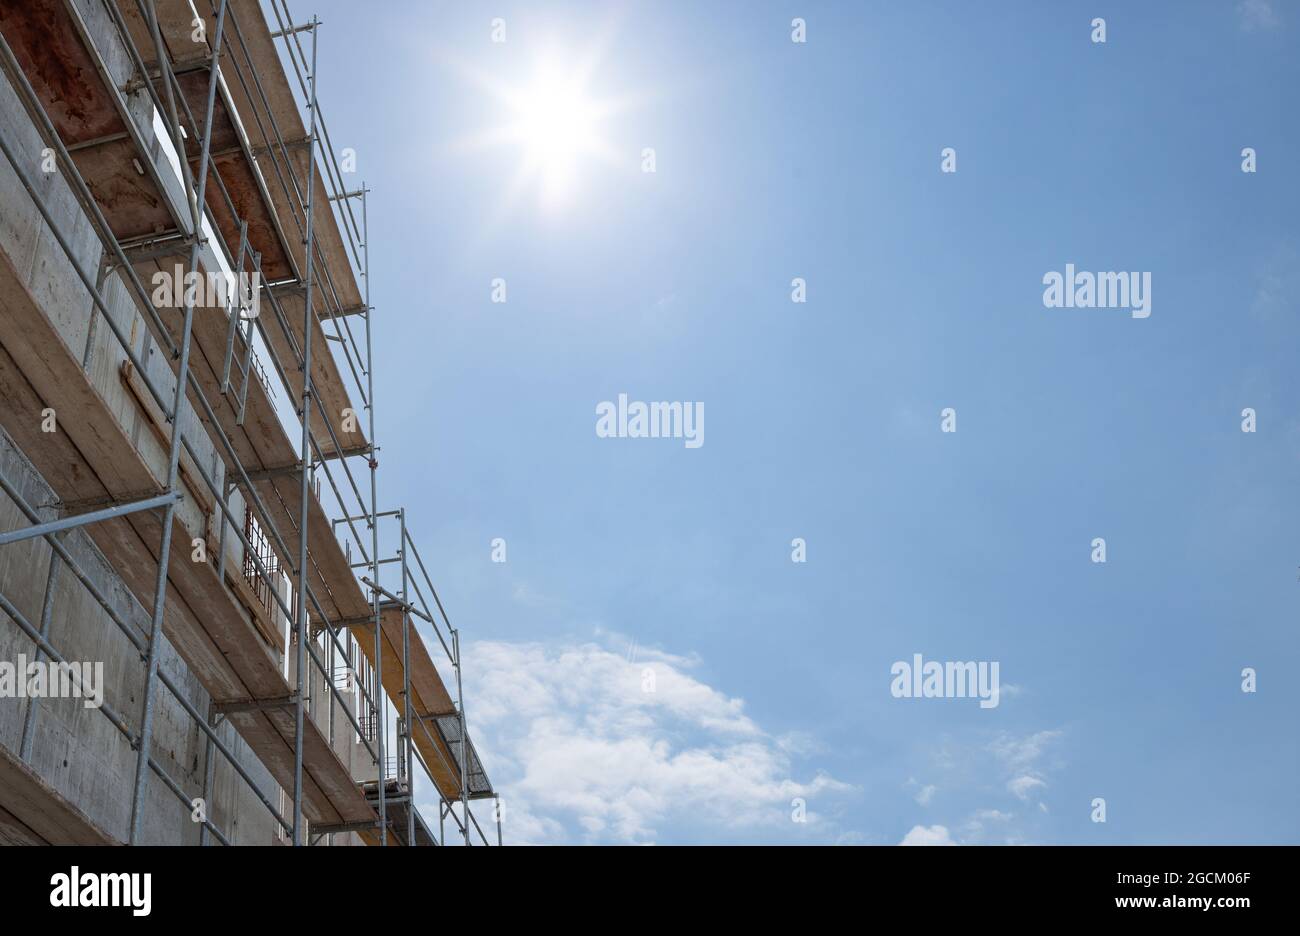 Scaffolding, metal mobile scaffold aginst blue sky background. for banner. Stock Photo